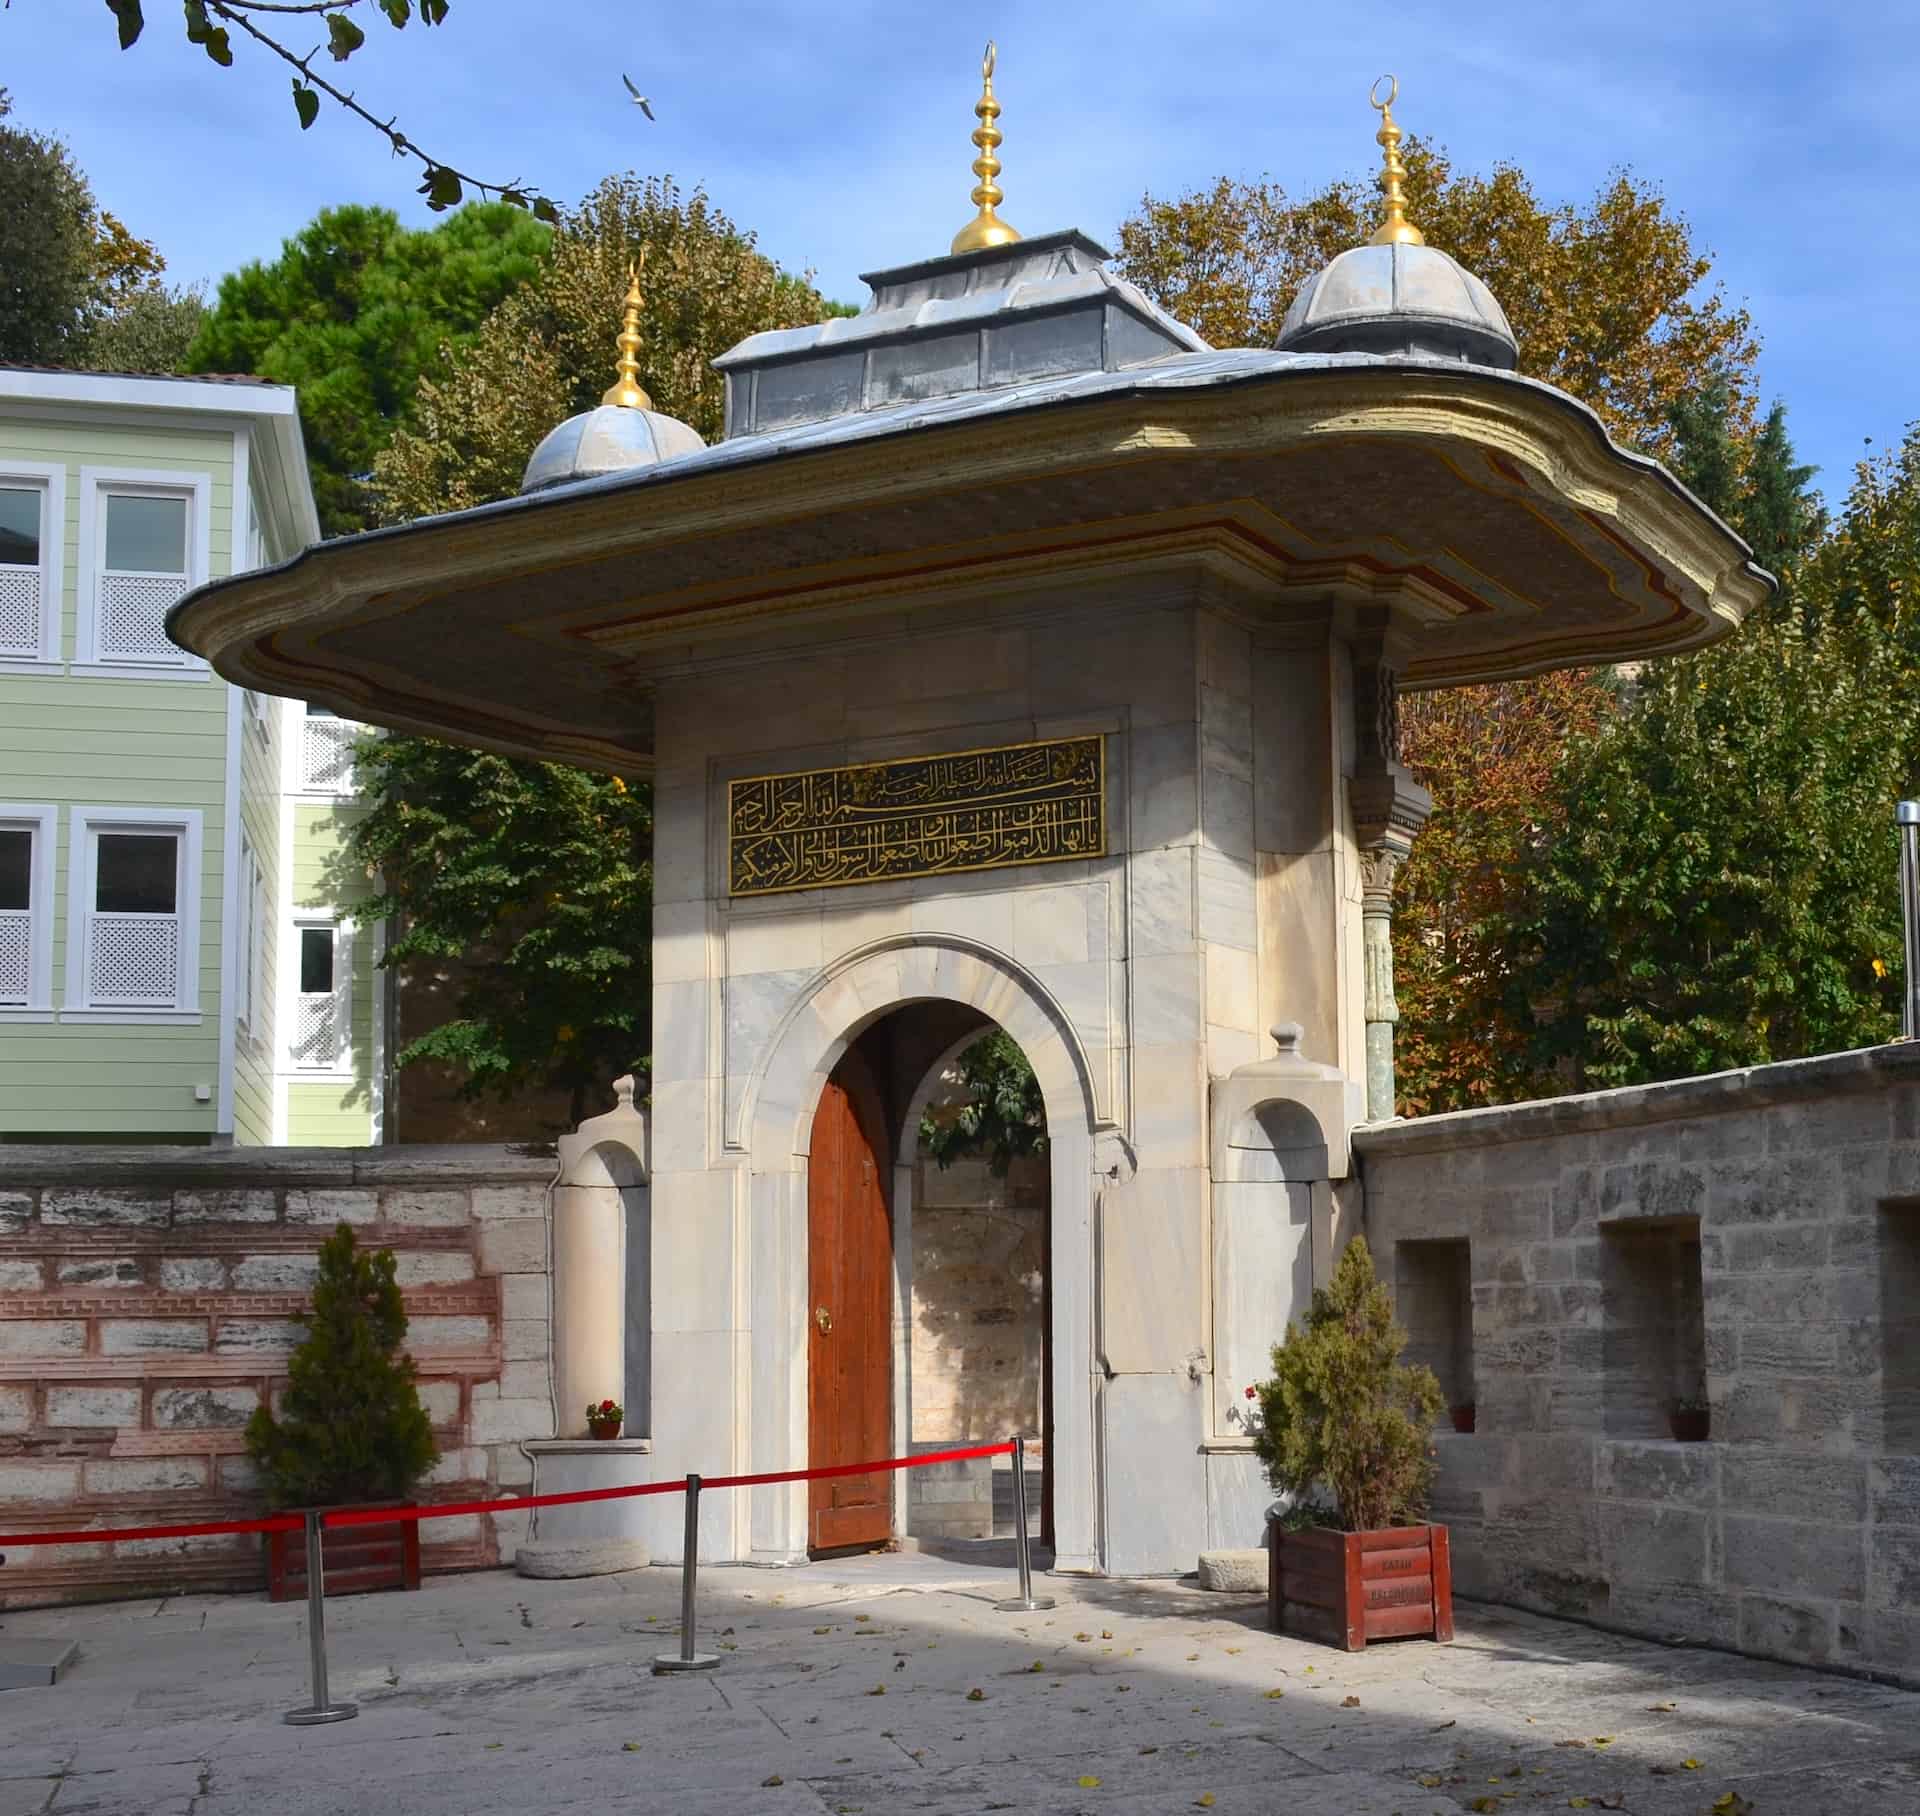 Gate to the almshouse at Hagia Sophia in Istanbul, Turkey